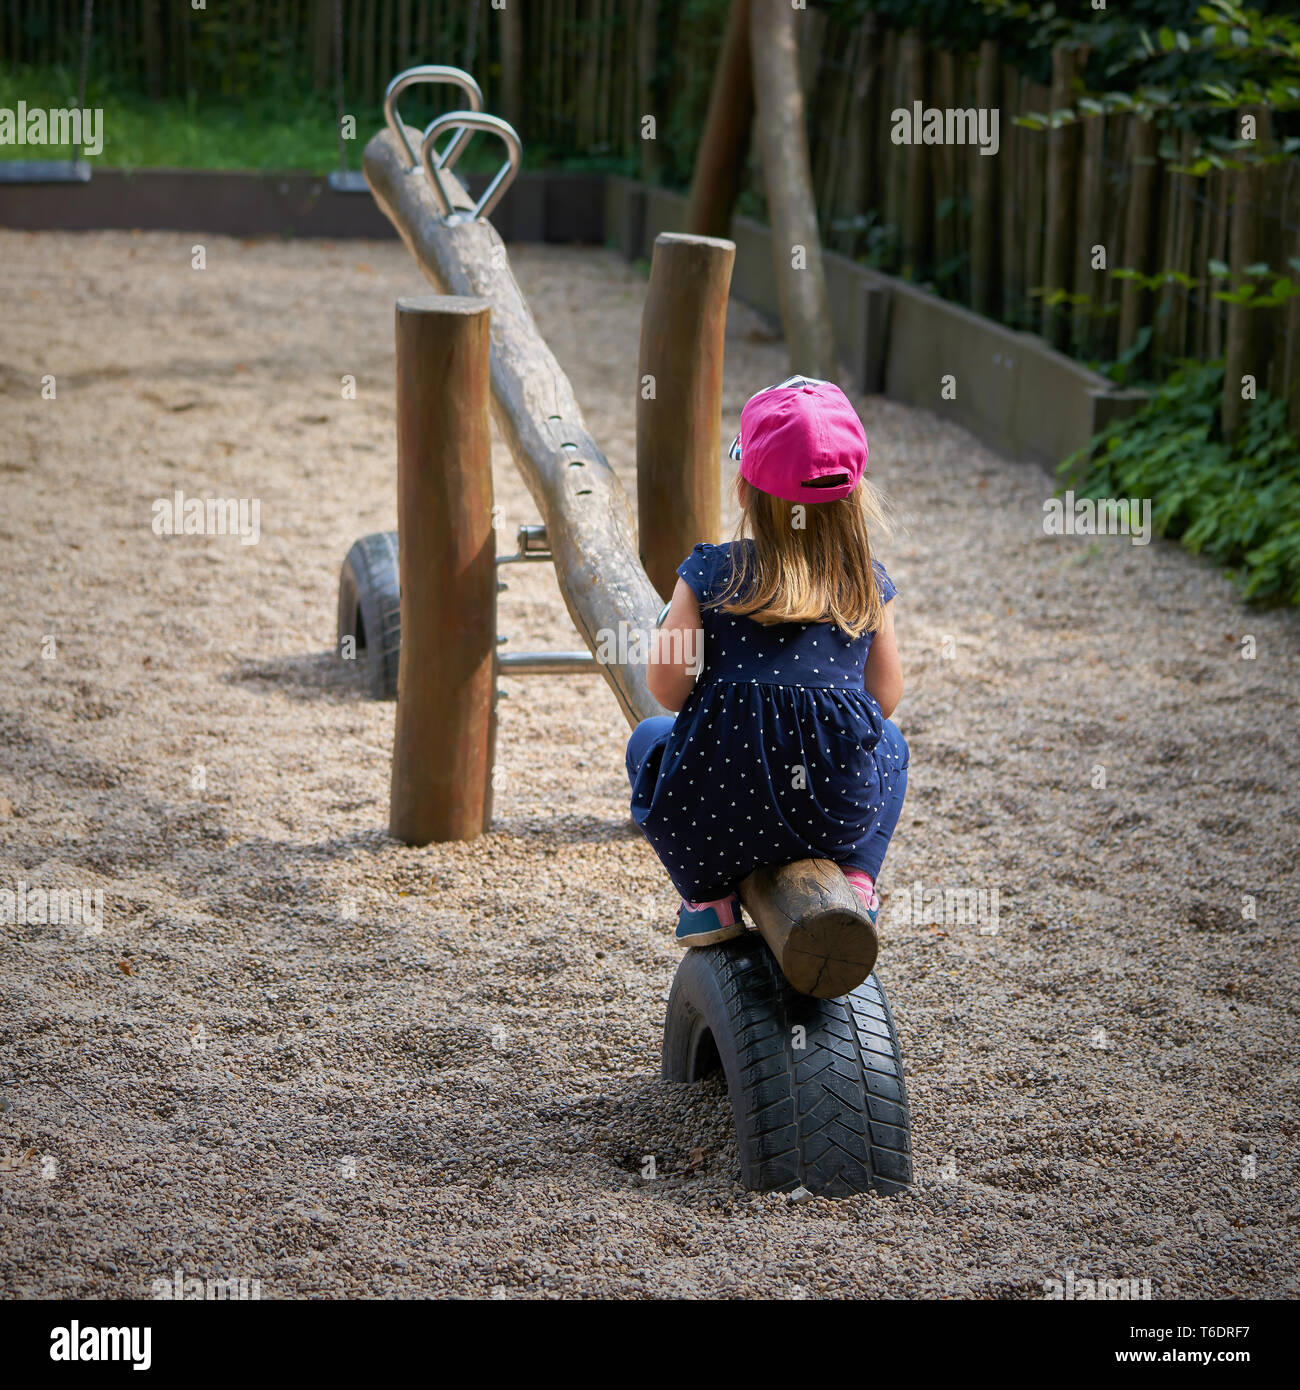 lonely little girl alone on a playground Stock Photo